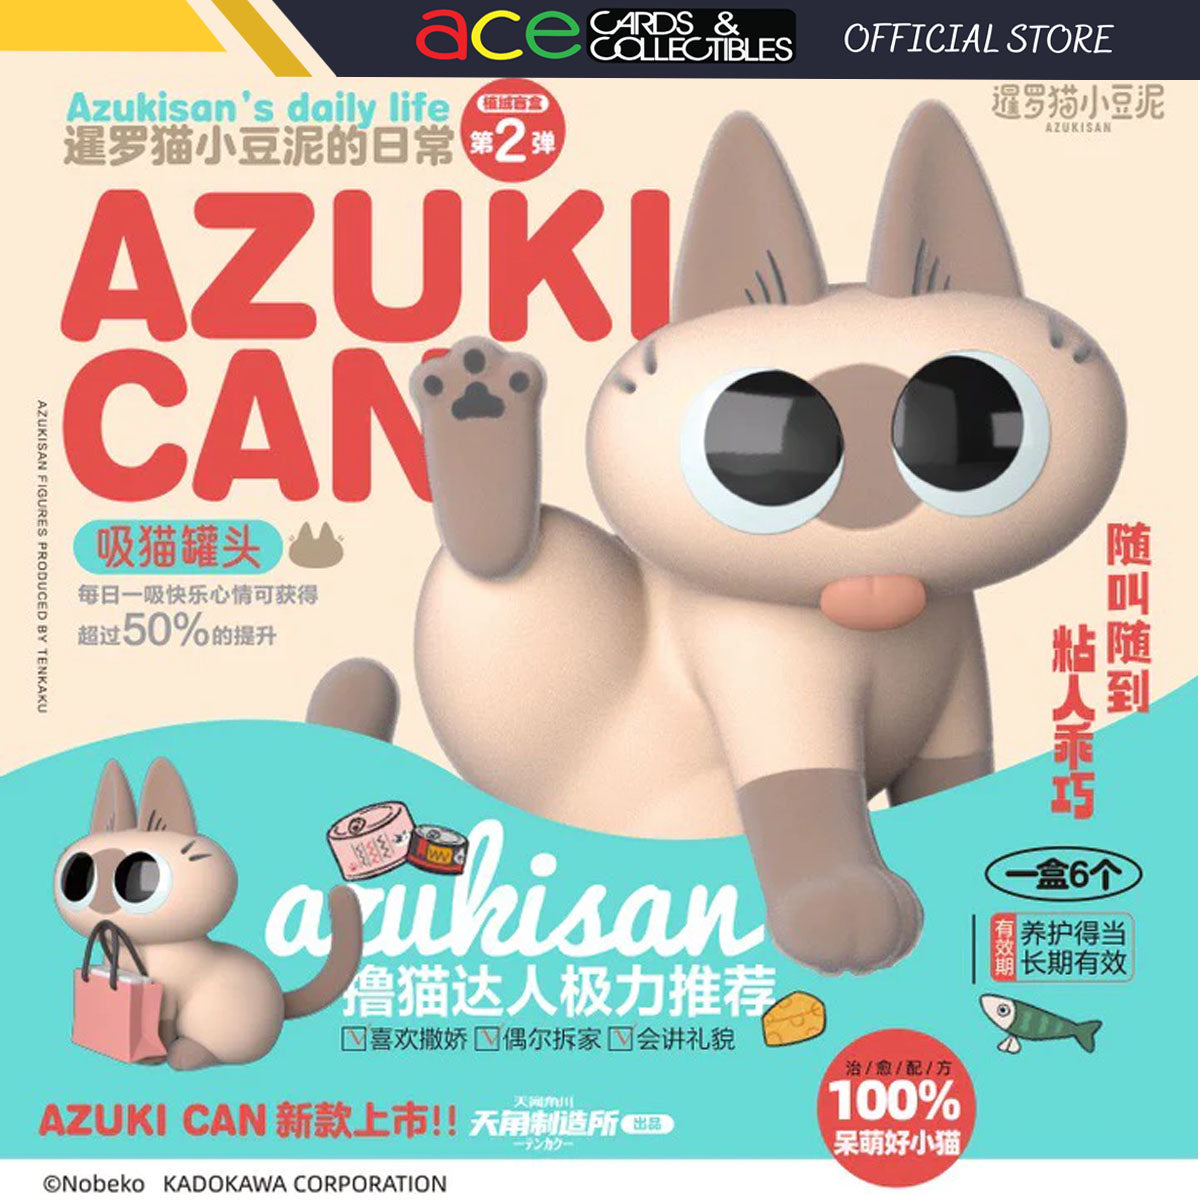 52Toys Azukisan's Daily Life Ver.2-Display Box (6pcs)-52Toys-Ace Cards & Collectibles